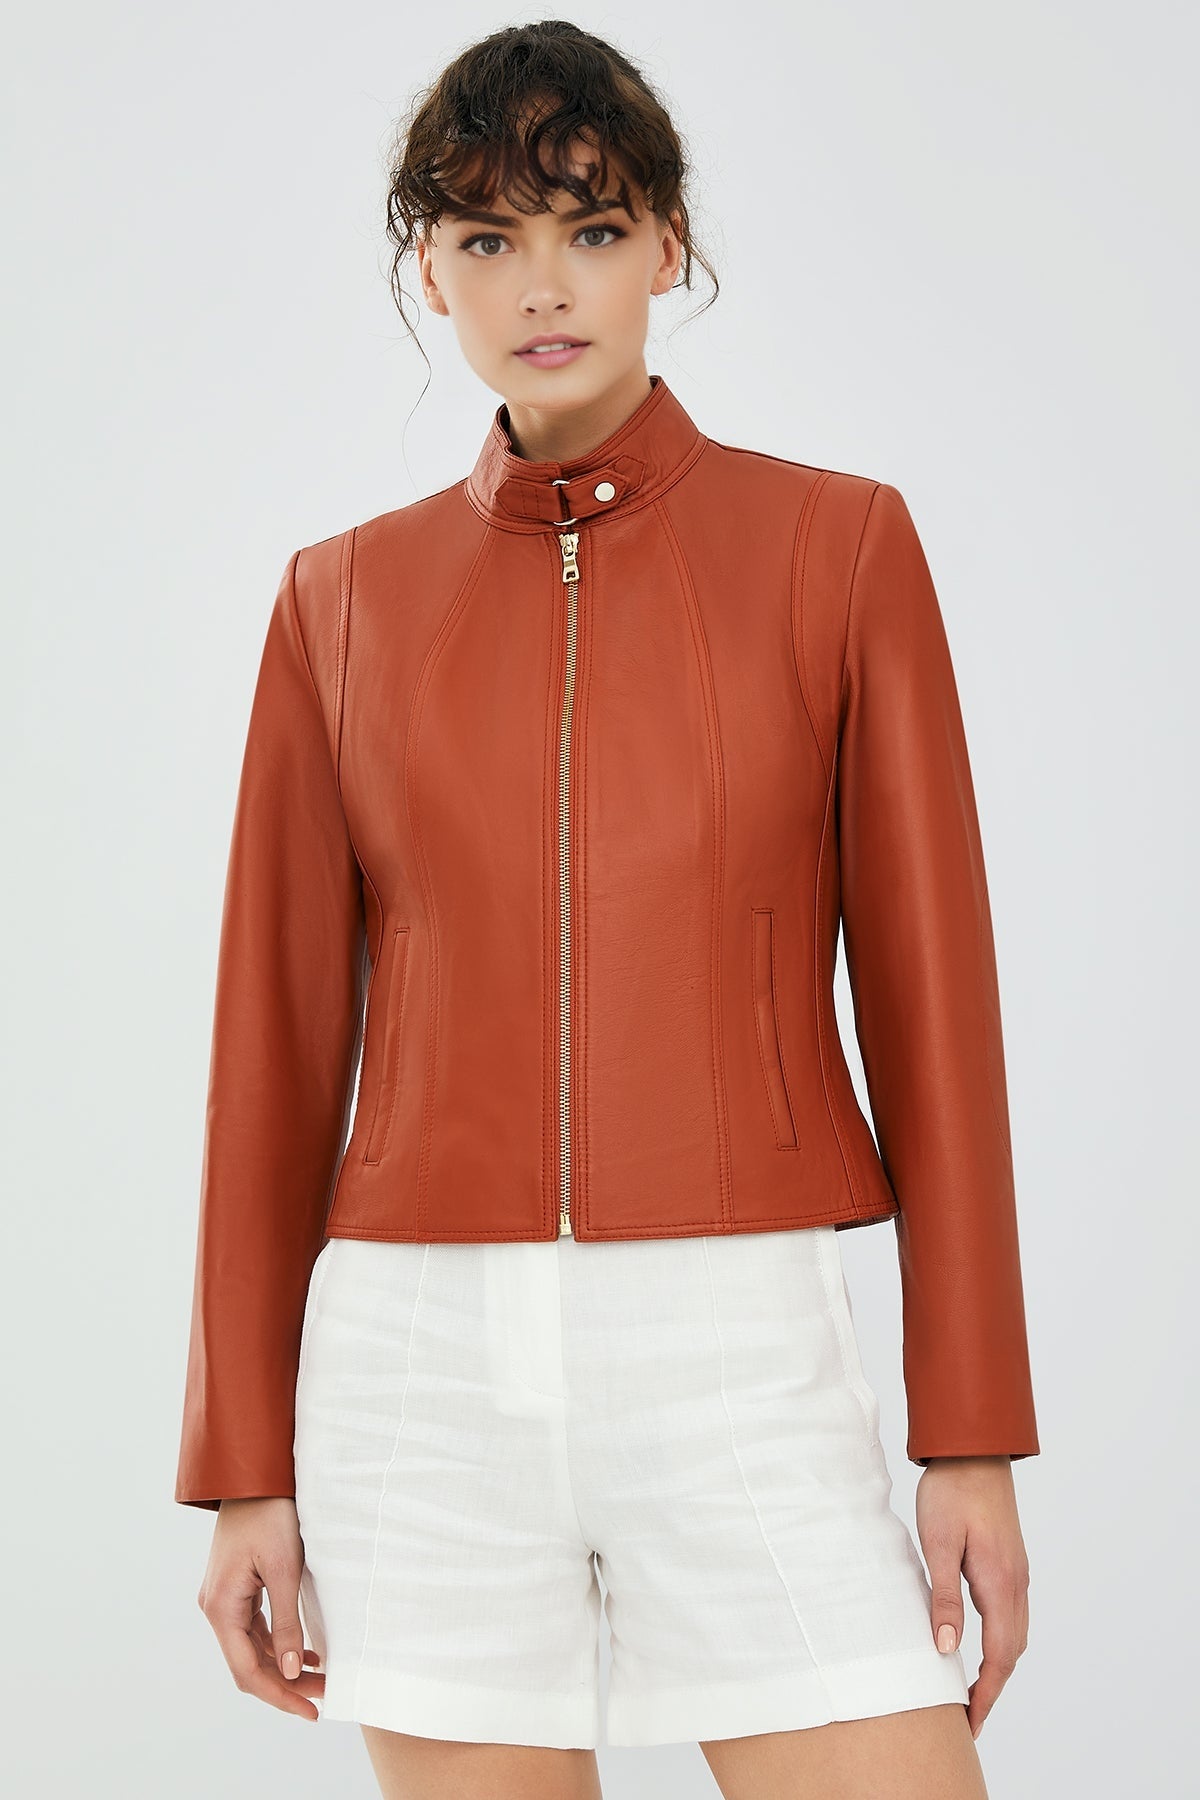 Angie Women's Brown Leather Jacket